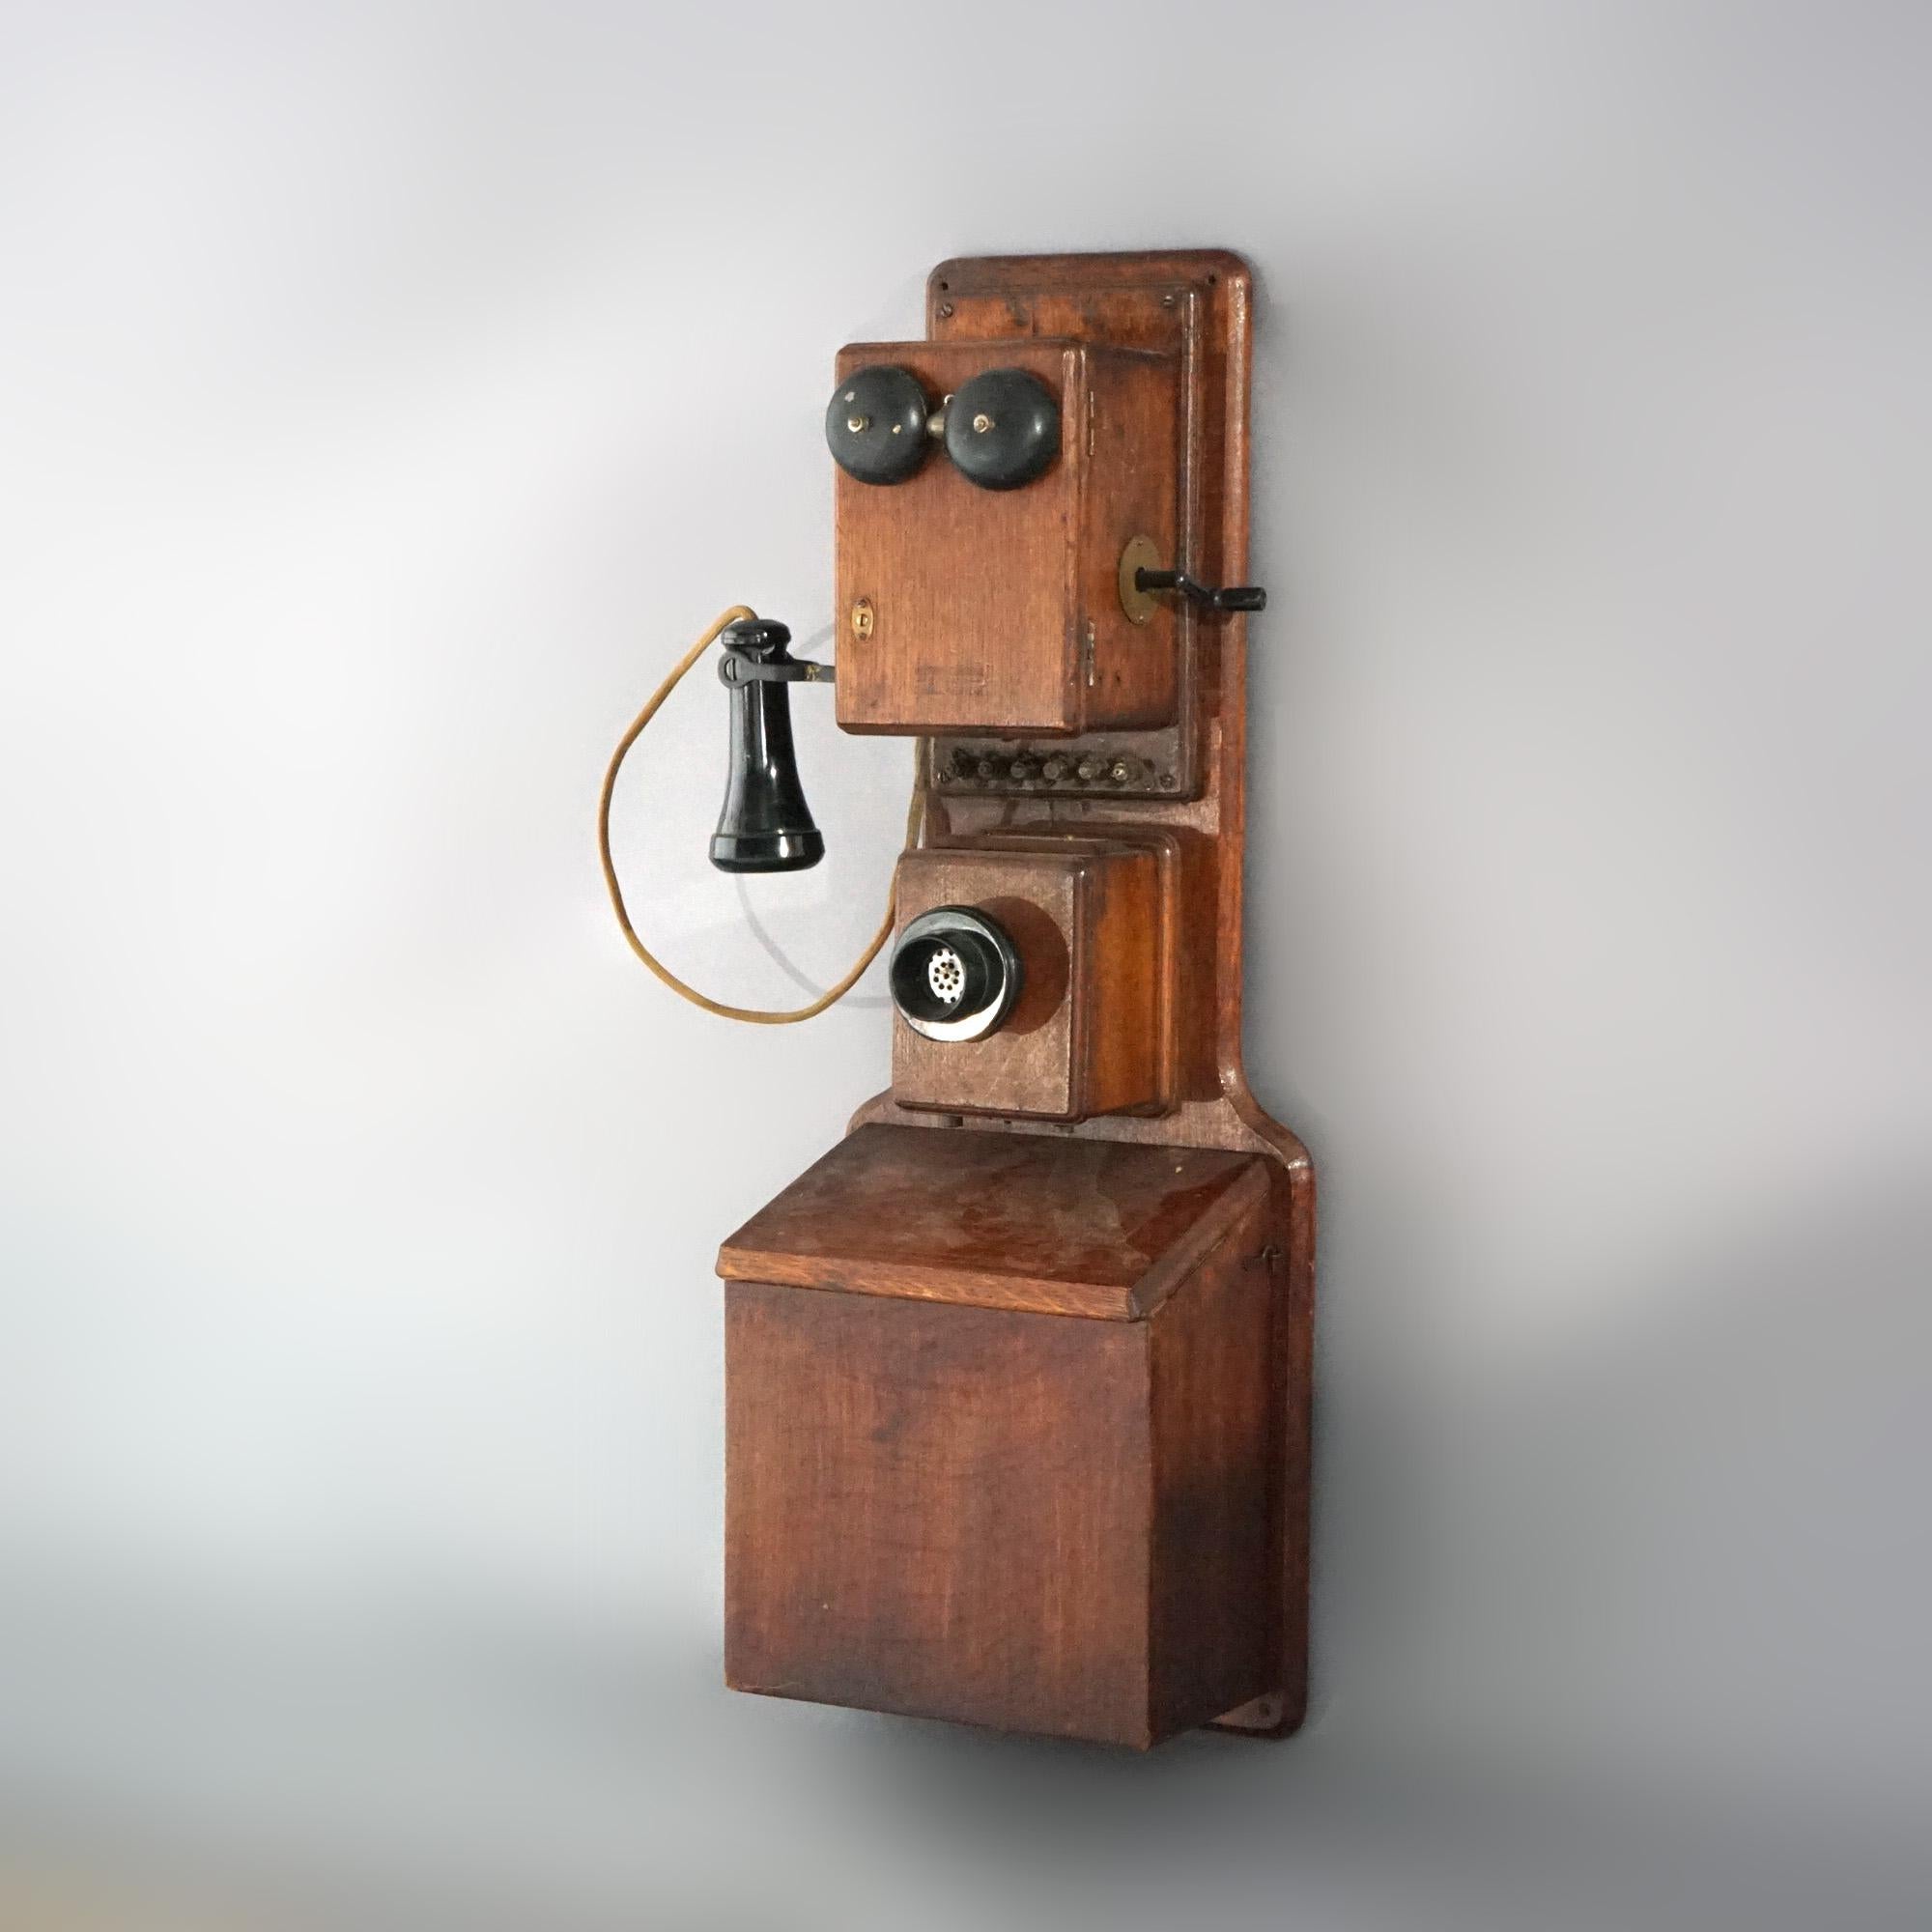 An antique western electric wall telephone offers full body oak case with hand crank; rewired to work with newer phone line, c 1900.

Measures:  32.5'' H x 11.75'' W x 7.25'' D.